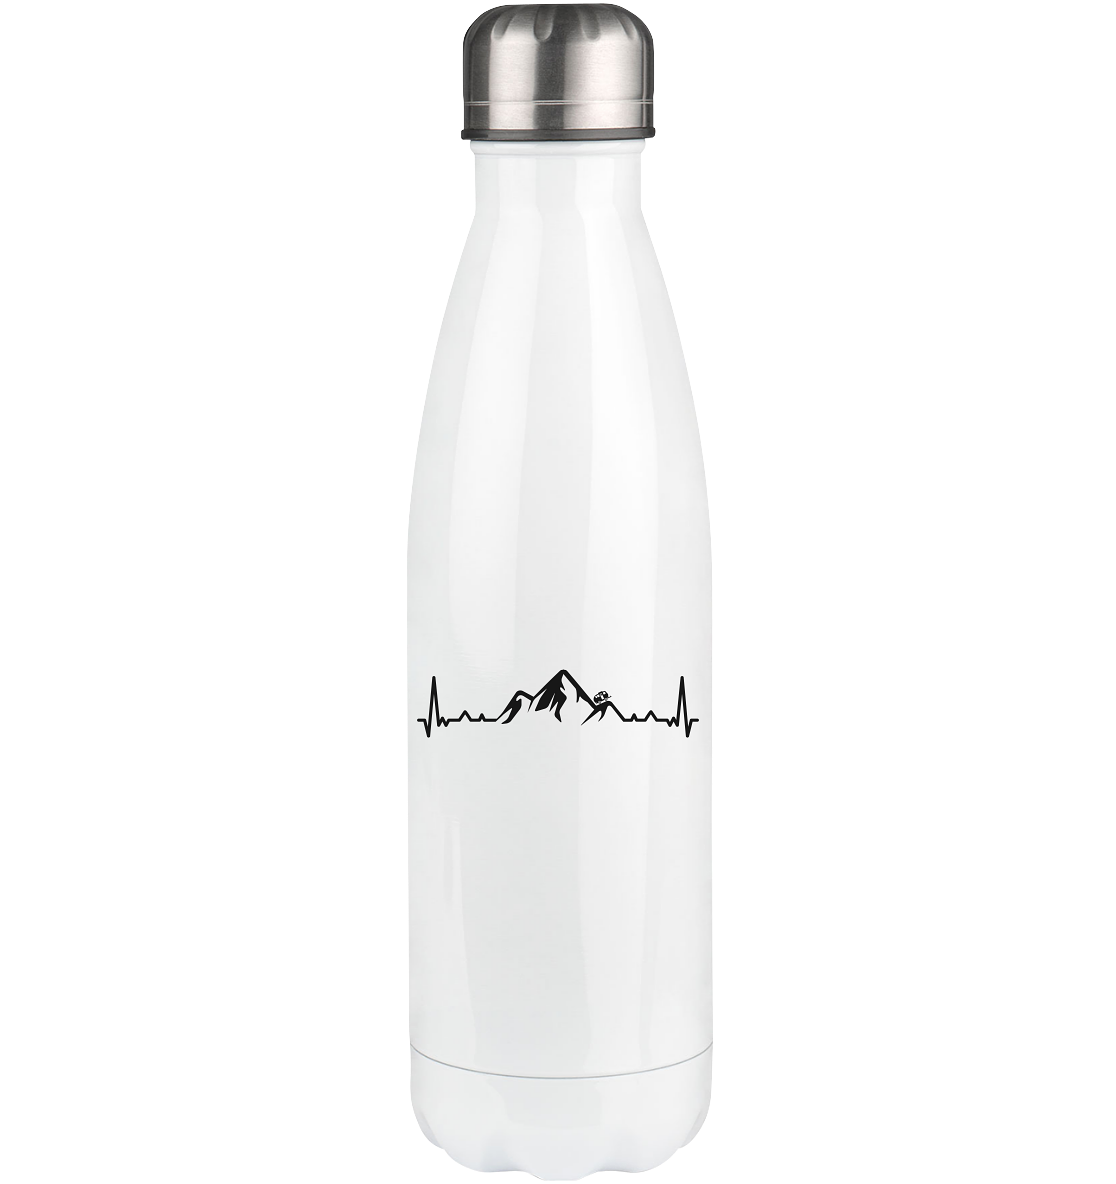 Heartbeat Mountain and Camping - Edelstahl Thermosflasche camping UONP 500ml